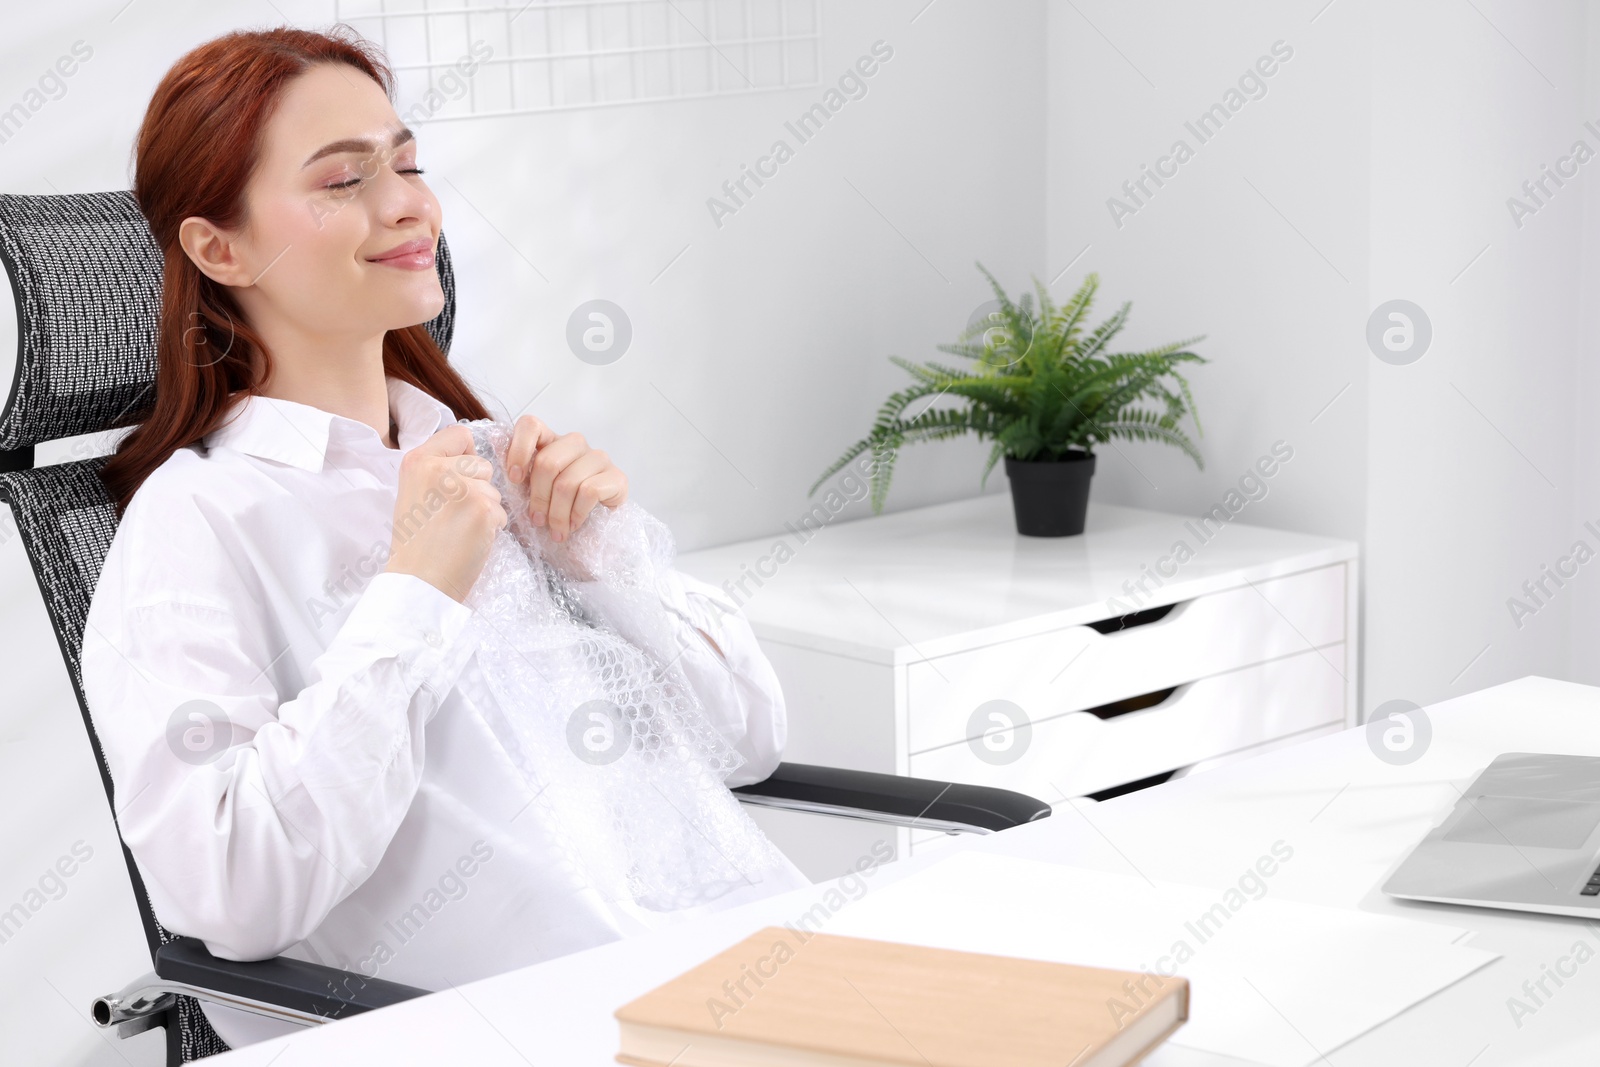 Photo of Woman popping bubble wrap at desk in office. Stress relief